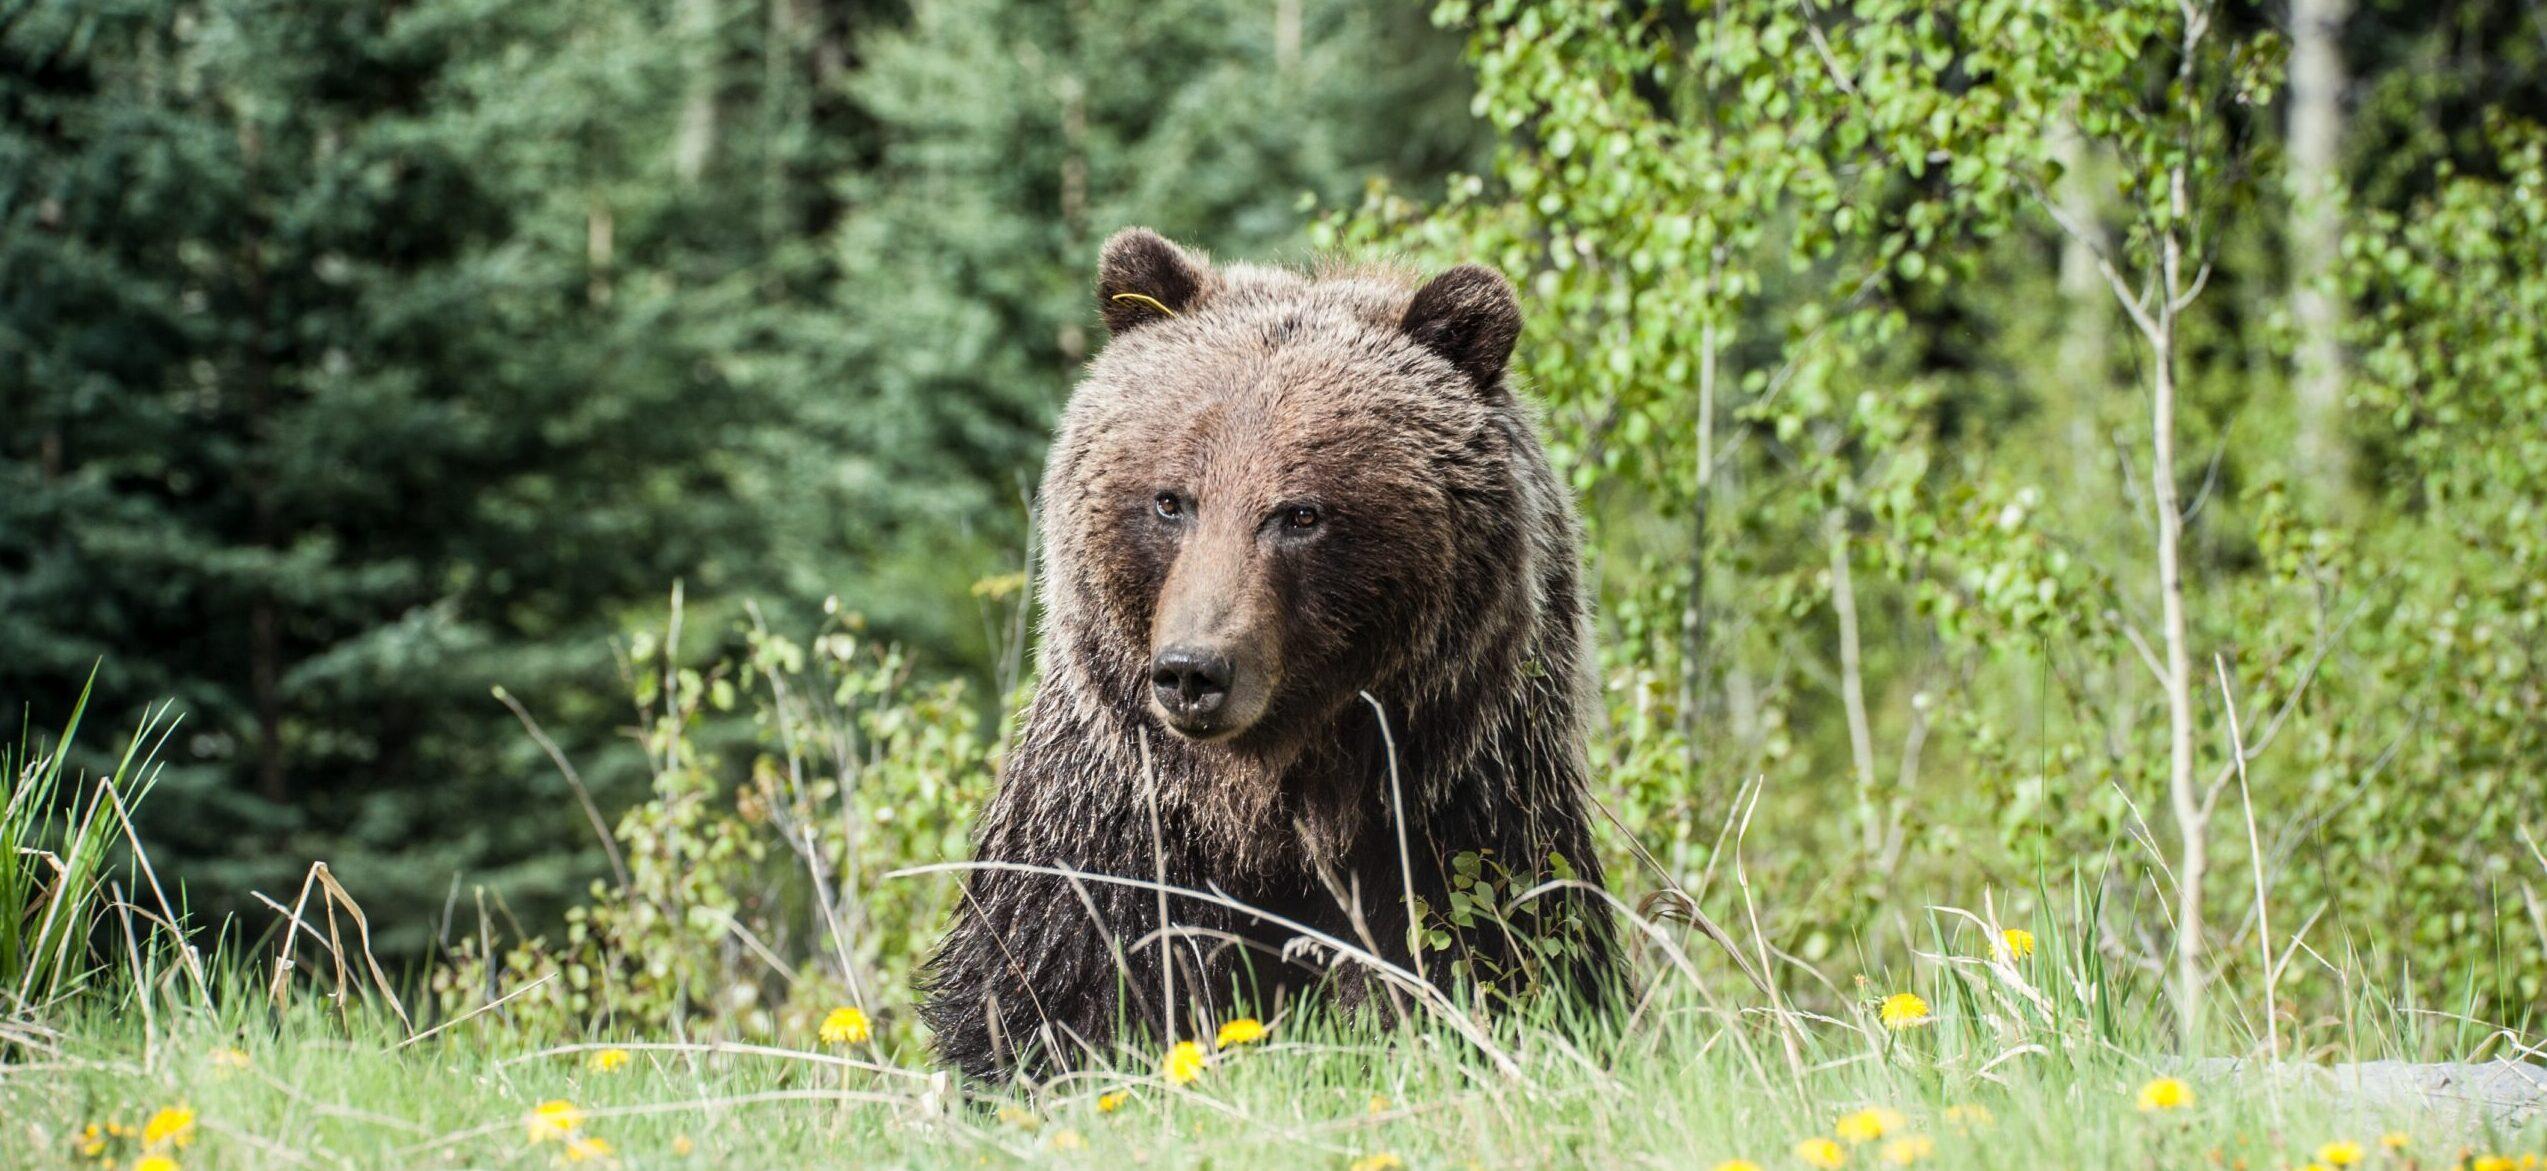 Grizzly Bear Kills Couple And Dog, But The Public Is Defending The Bear!